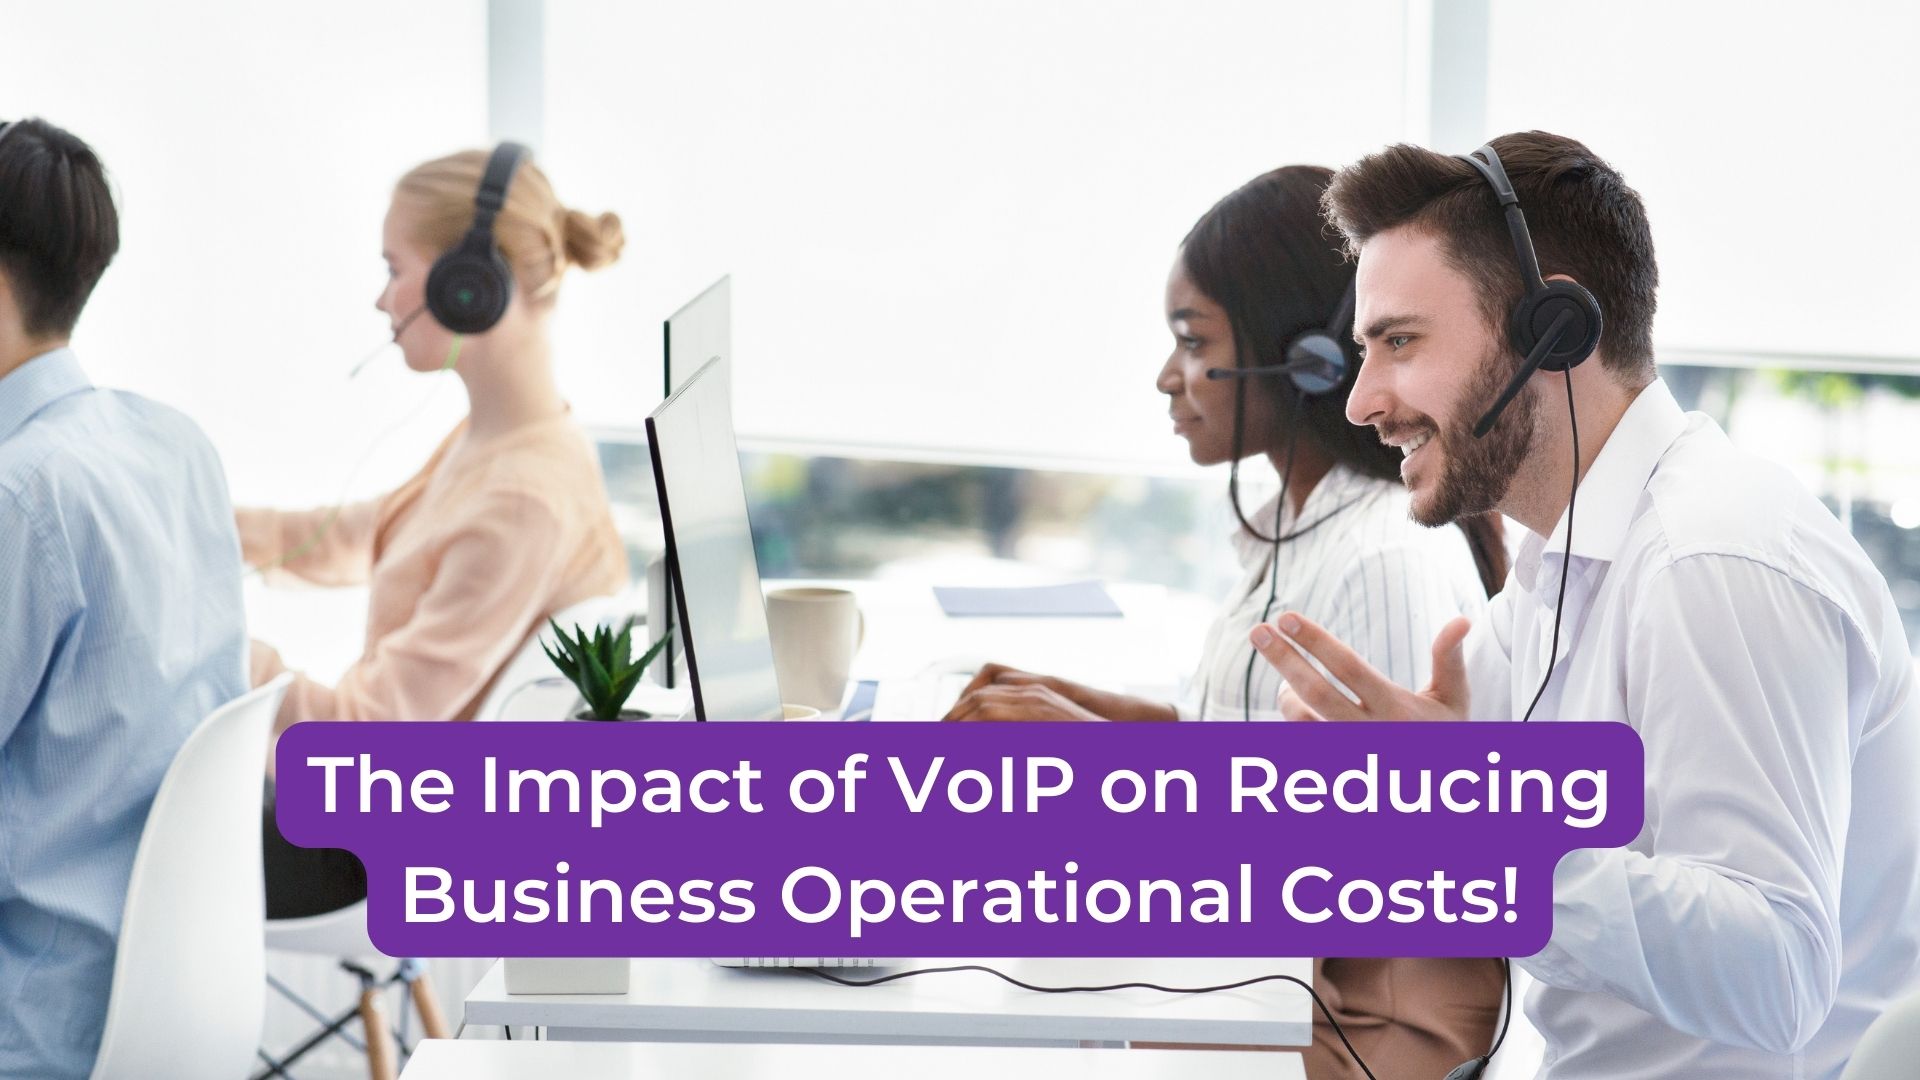 The Impact of VoIP on Reducing Business Operational Costs